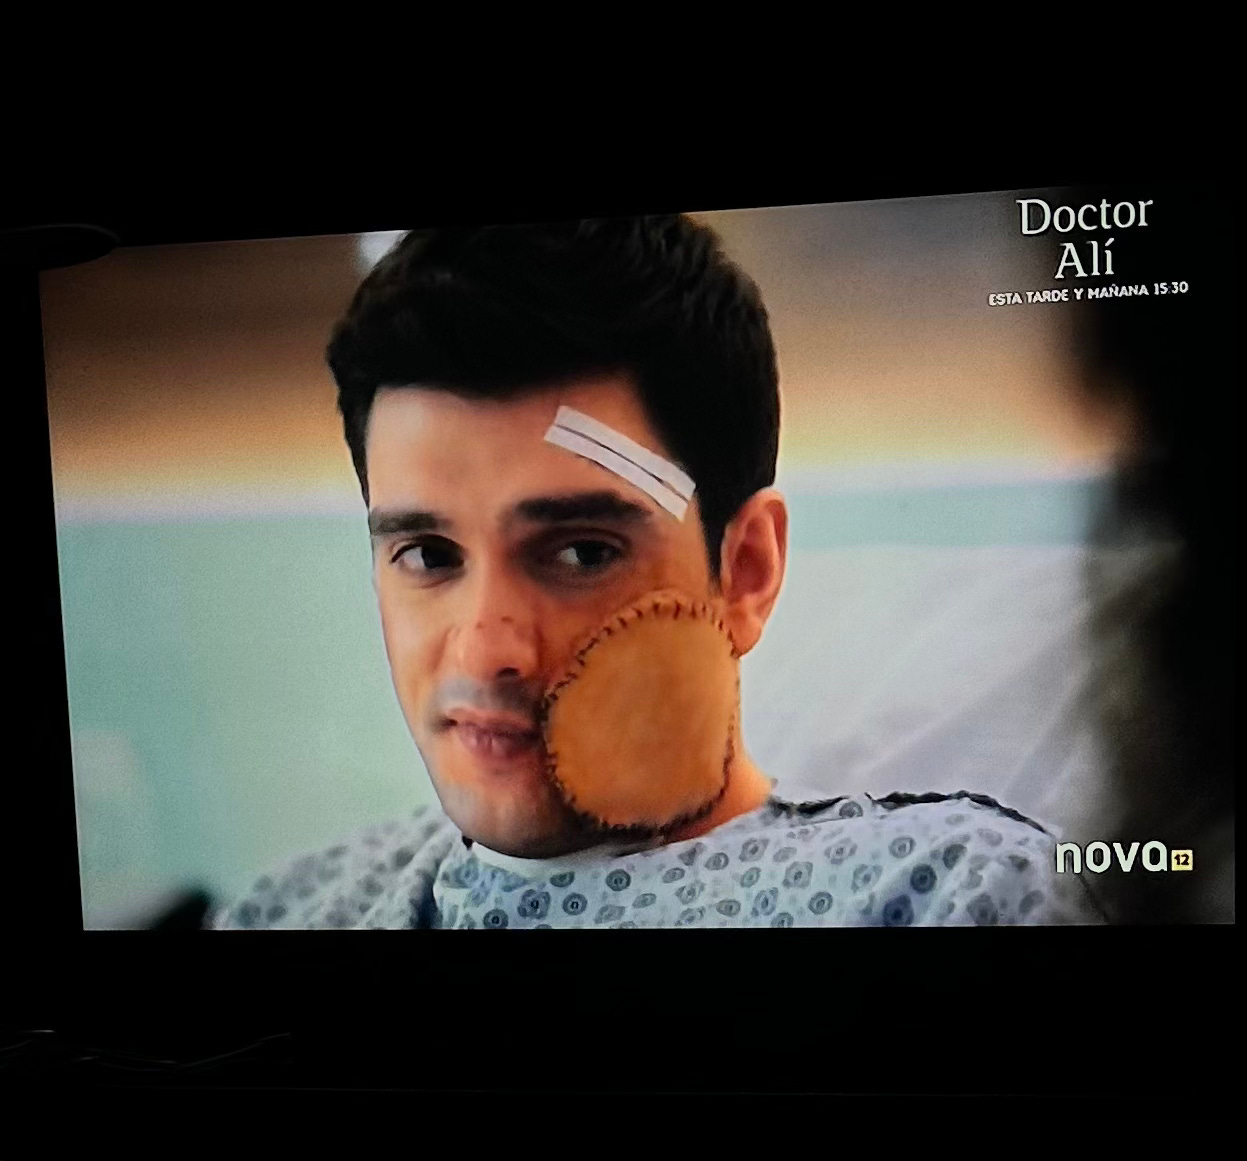 A screenshot of a Spanish telenovela in which a character has a large skin graft on his face.